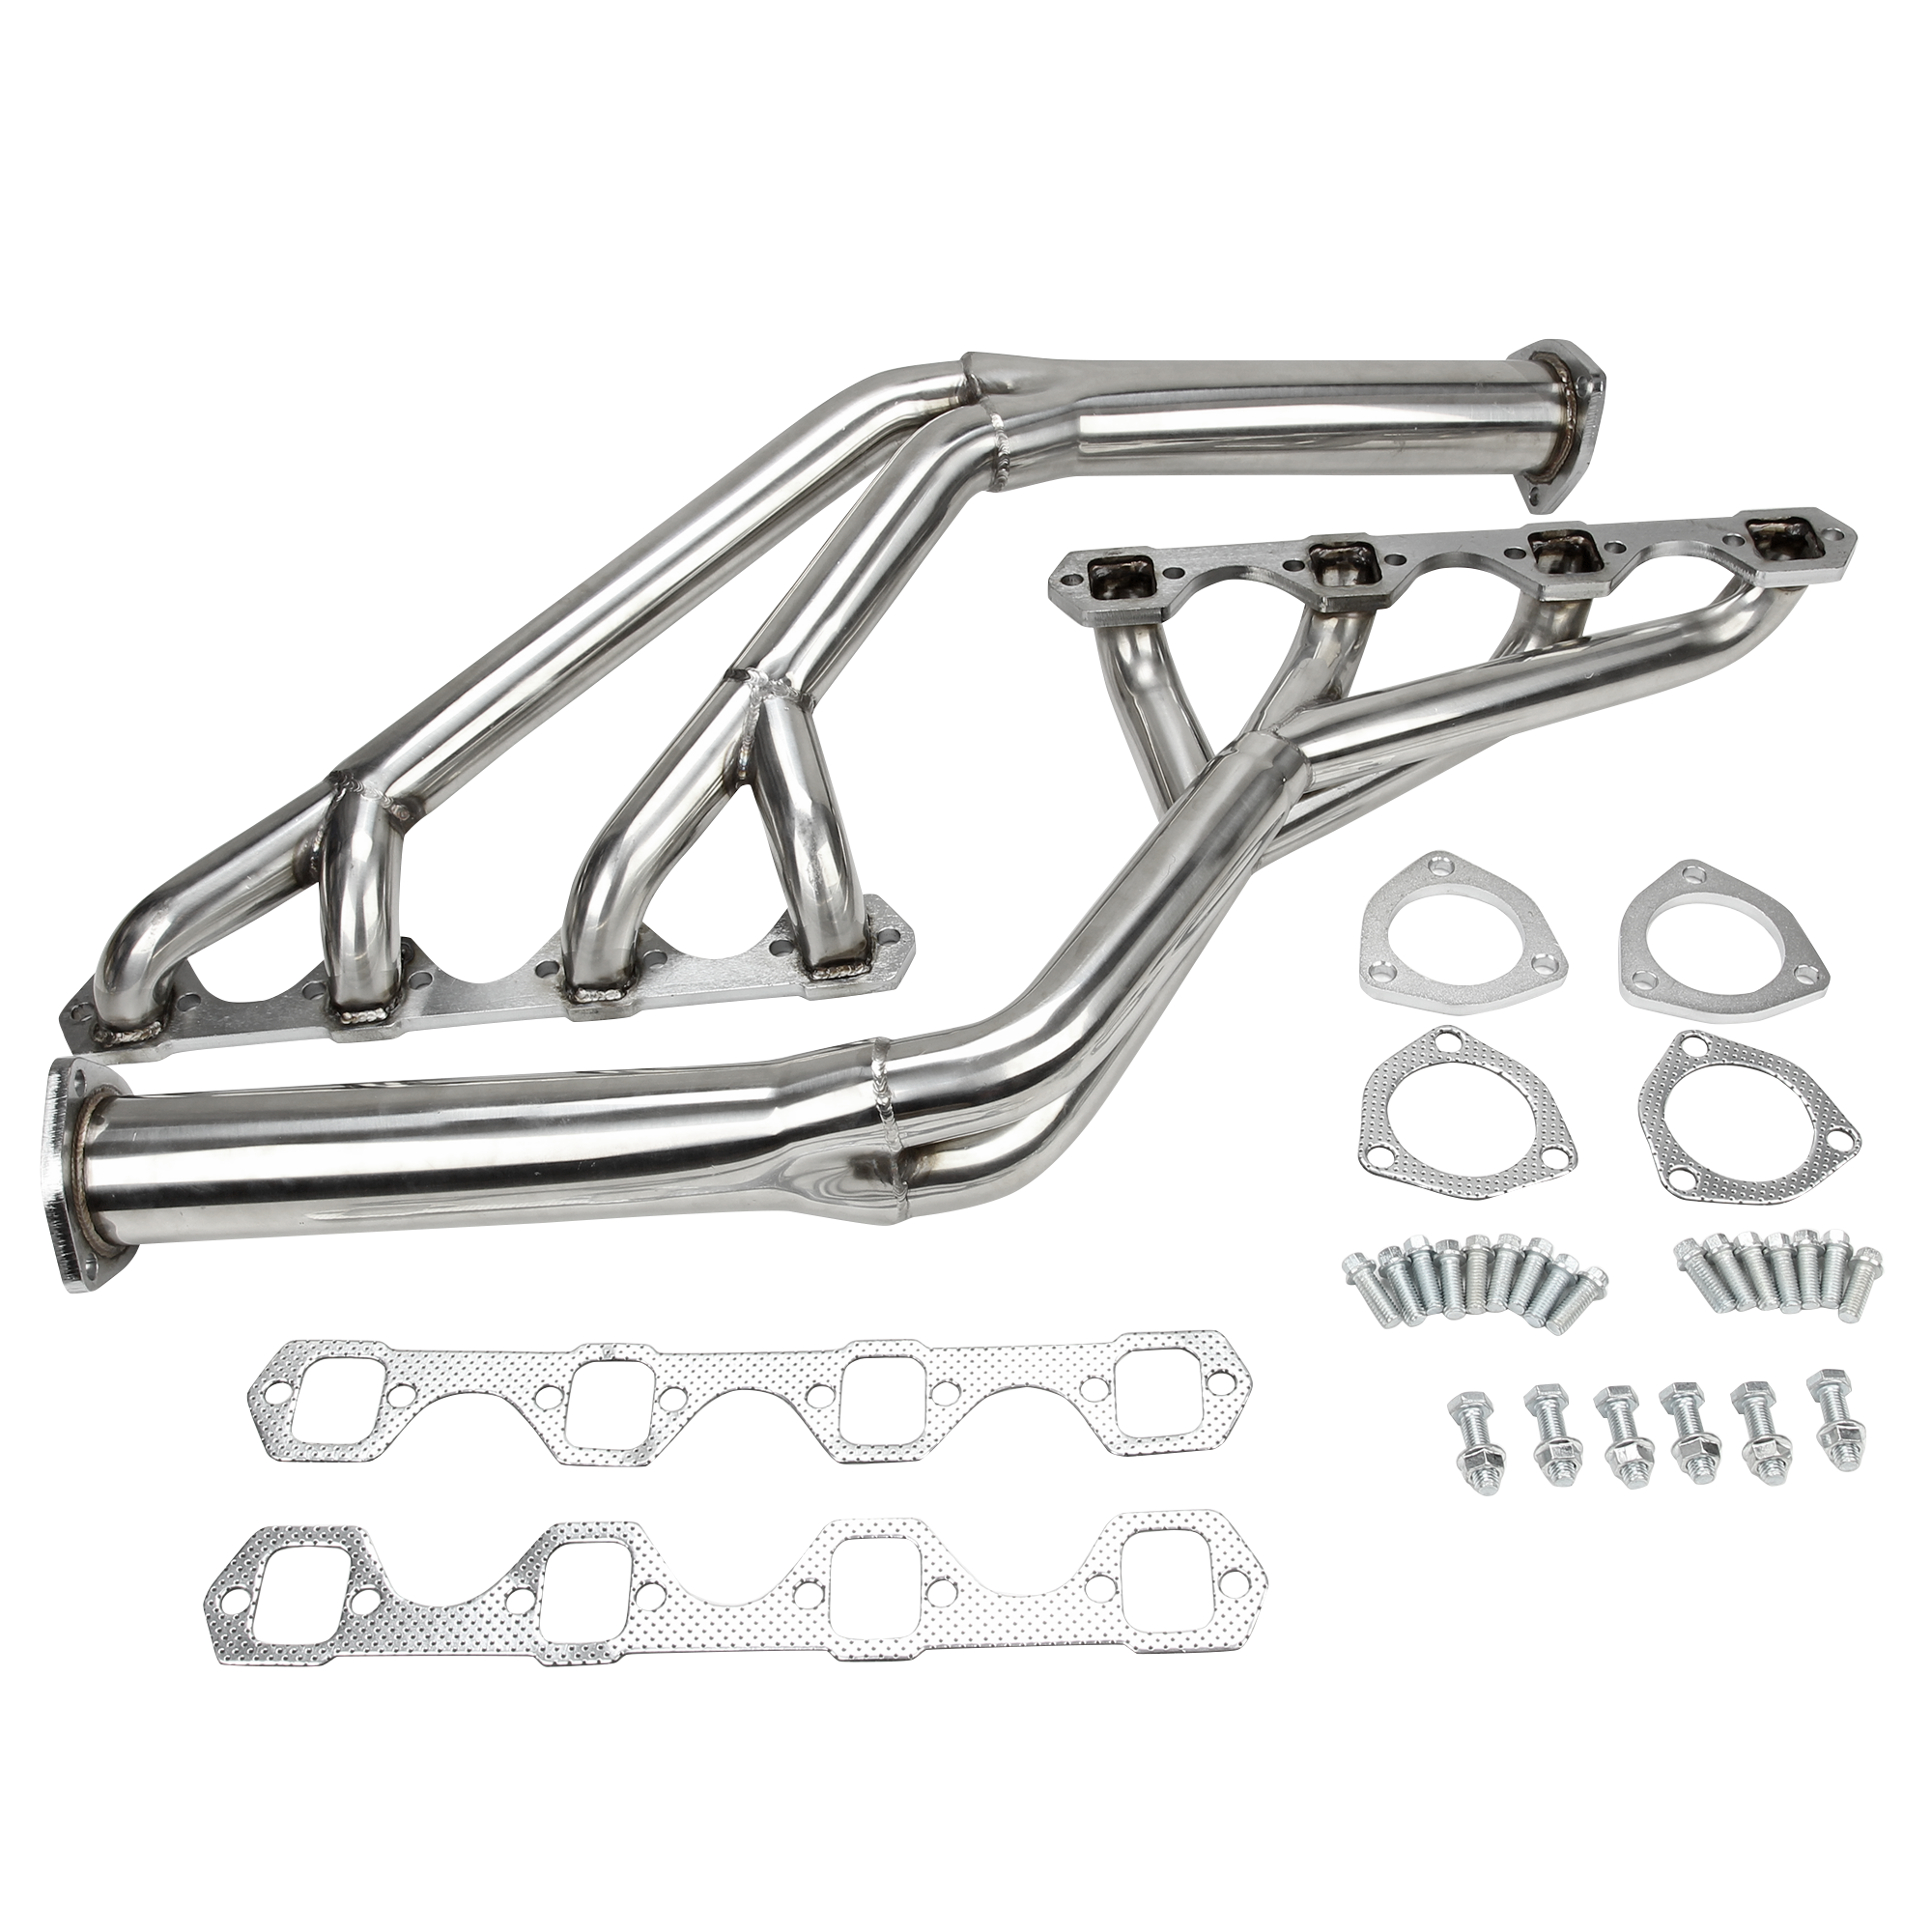 Exhaust Manifold Headers TRI-Y Stainless for Ford Mercury, Mustang, Cougar, 260, 289, 302,